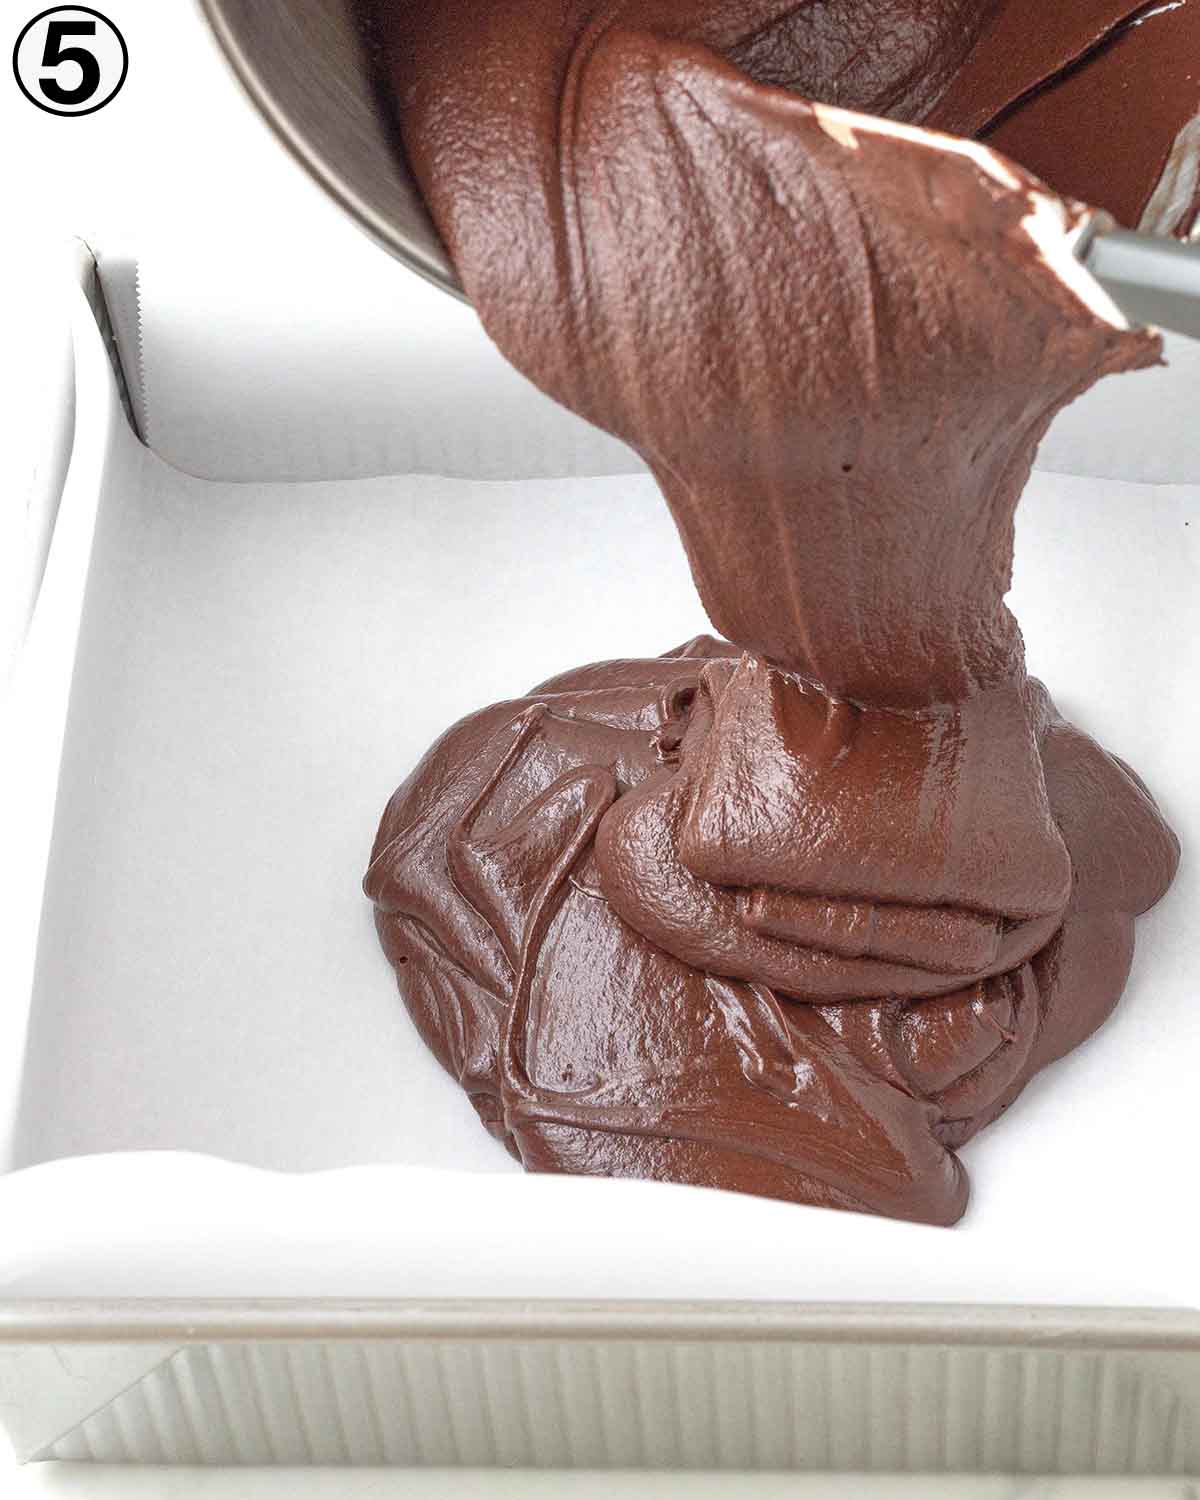 Vegan chocolate fudge being poured into a square pan.